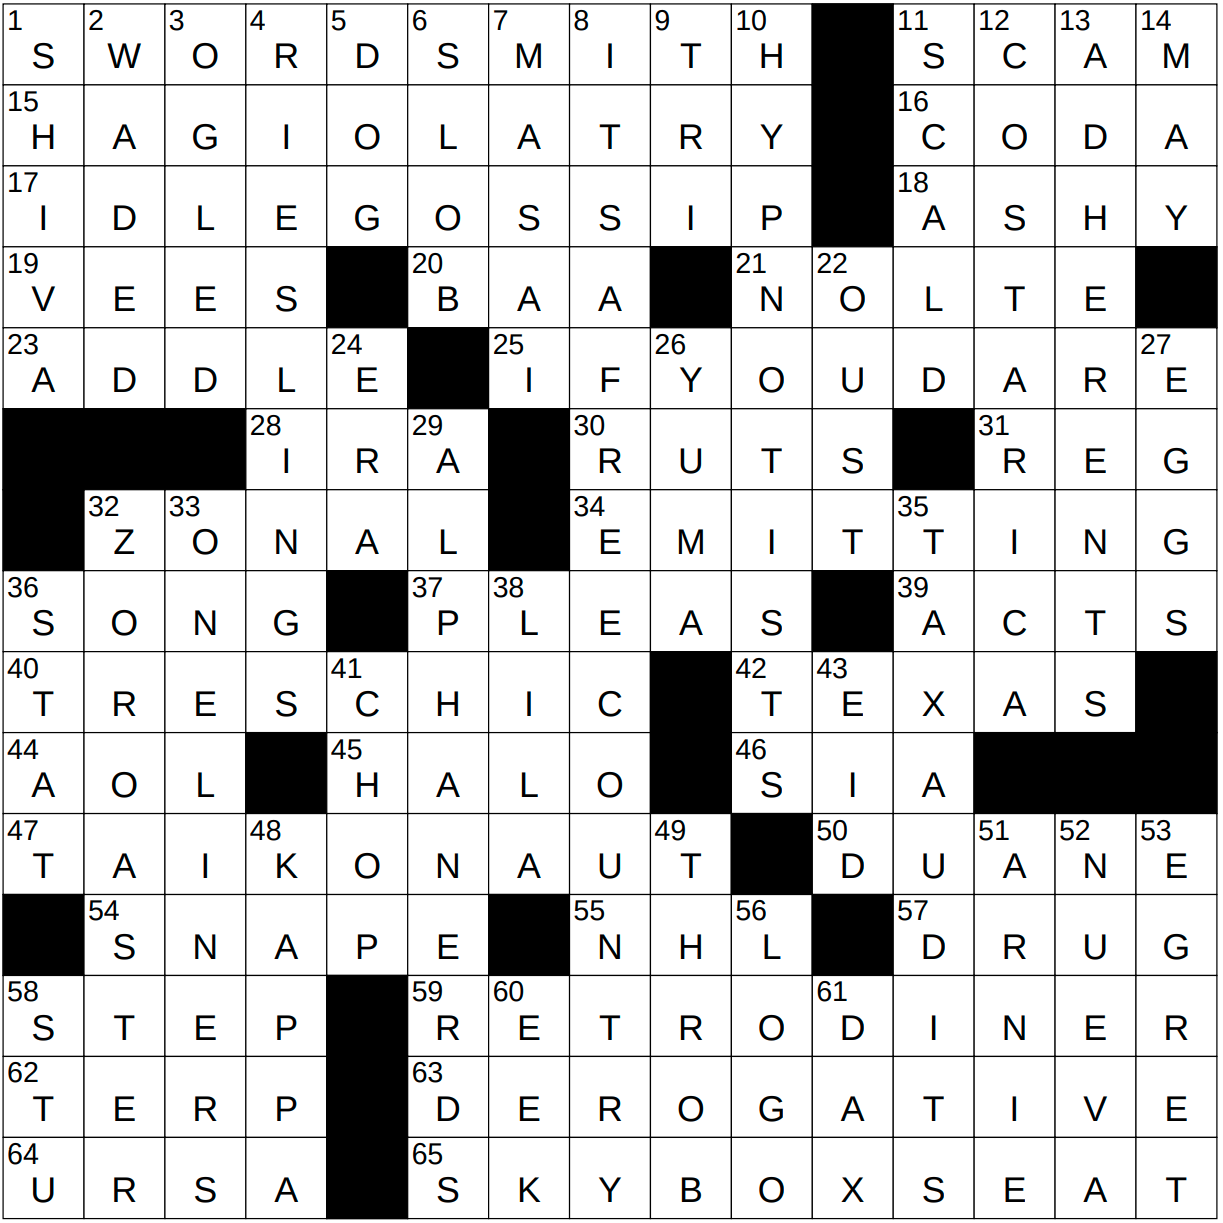 Just 2 Words - JUMBLE CROSSWORD PUZZLE + 2 ANSWERS! (June 25) I've placed  two answers to today's Jumble Crossword clues at the bottom of this post.  Keep your eyes up here